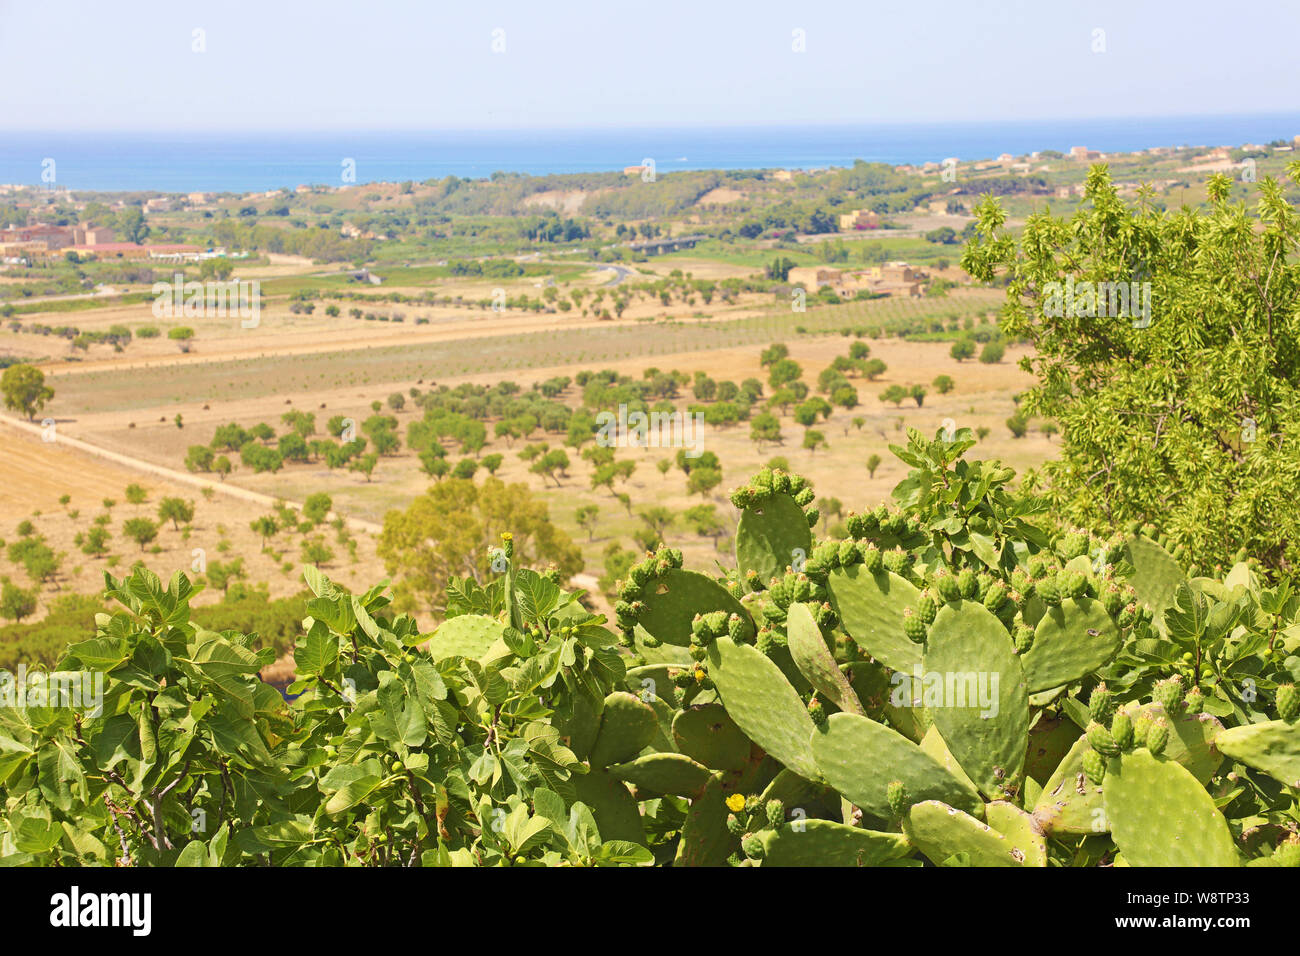 Prickly pear cactus and vegetation in Valley of the Temples, Agrigento, Sicily Stock Photo